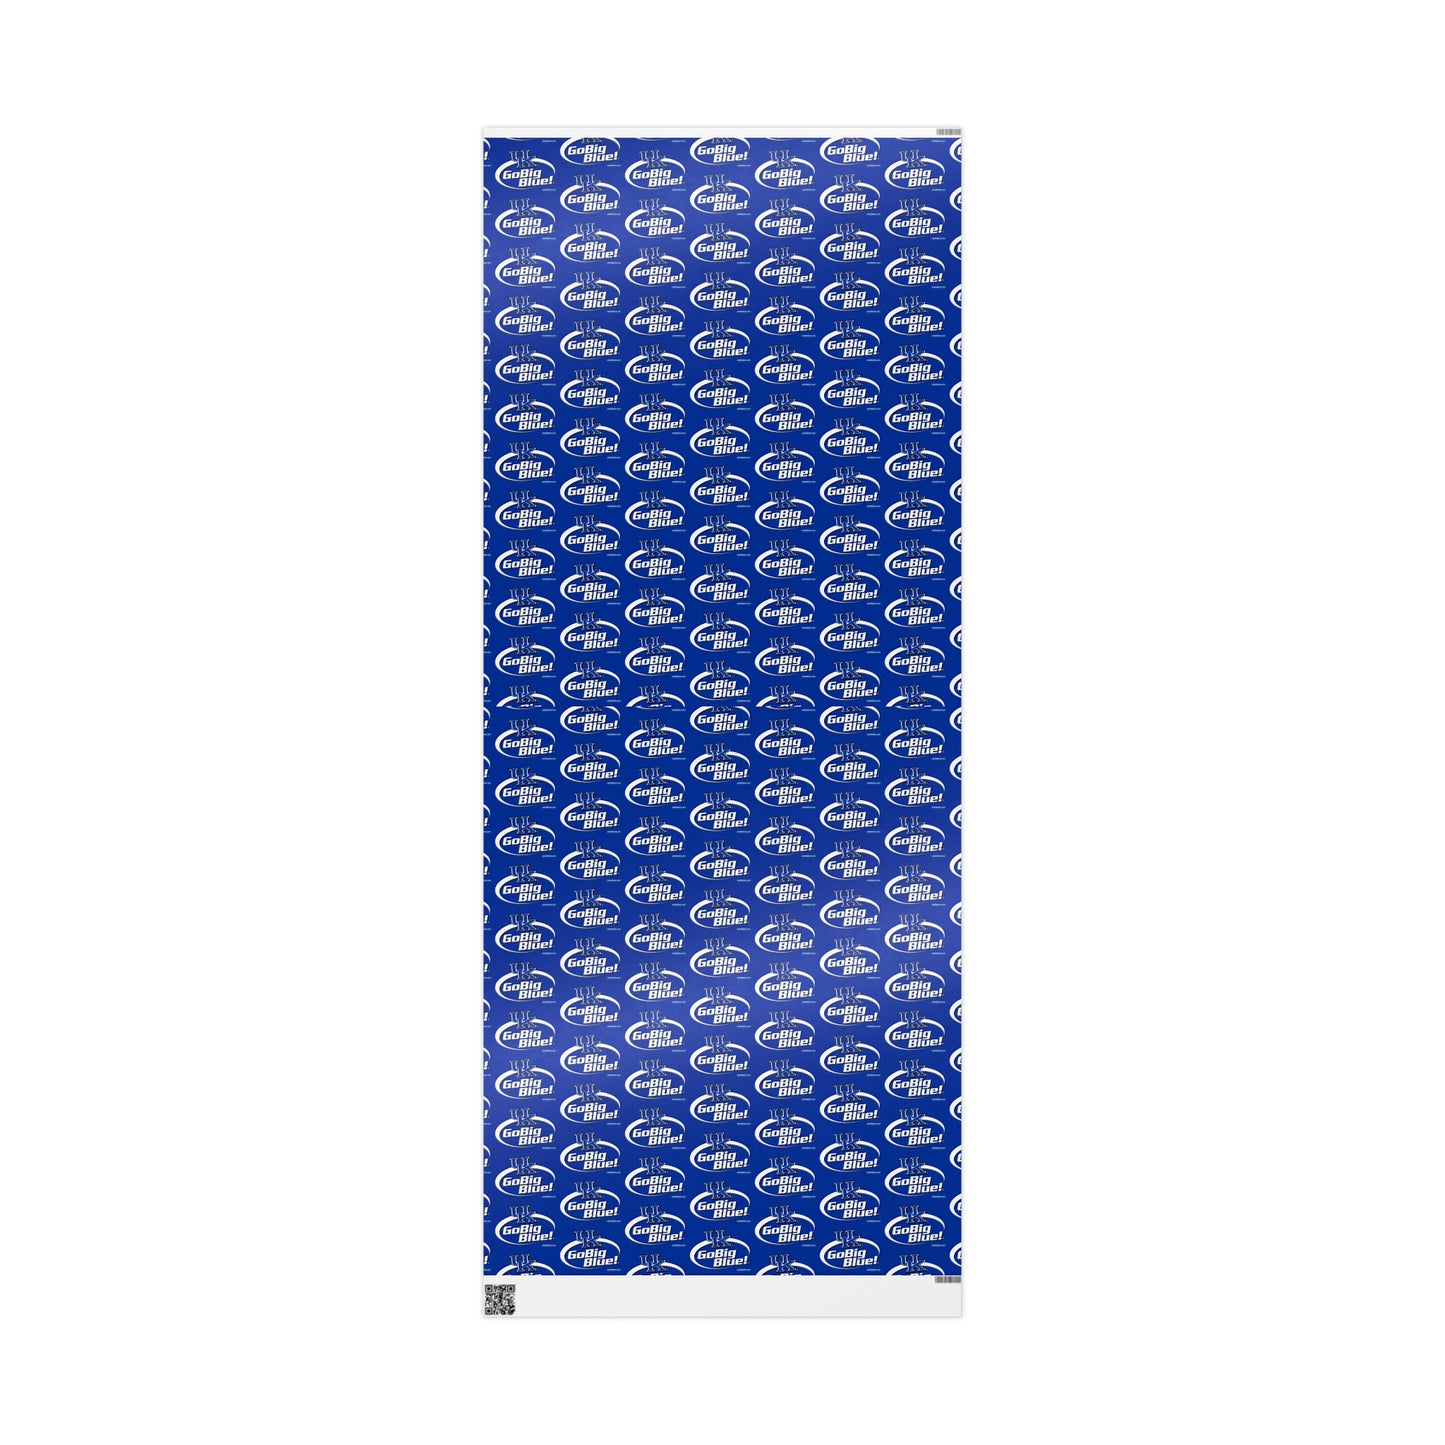 UK Kentucky Wildcats Basketball March Birthday Gift Wrapping Paper Holiday